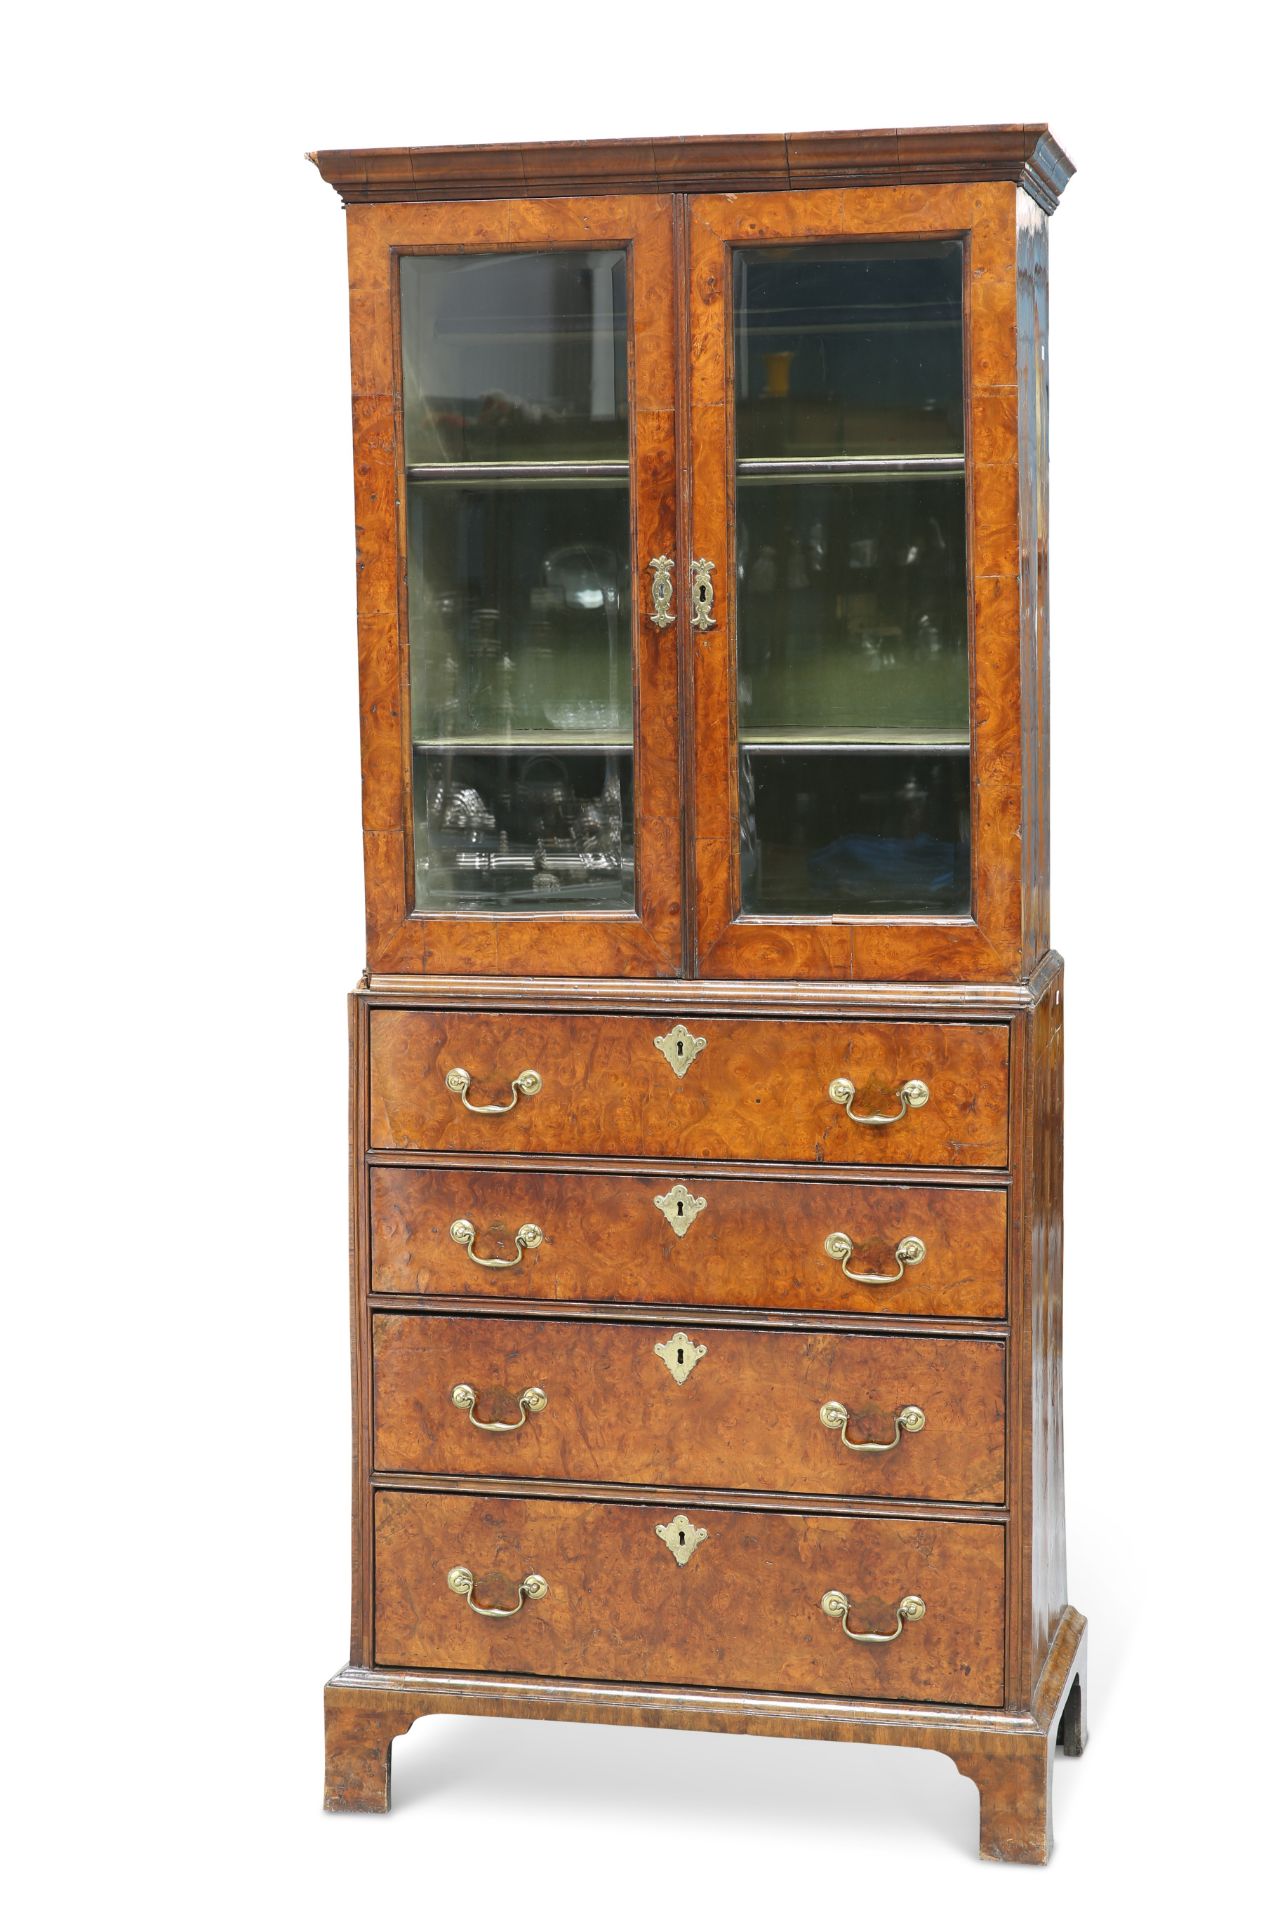 AN EARLY 18TH CENTURY WALNUT CABINET ON CHEST